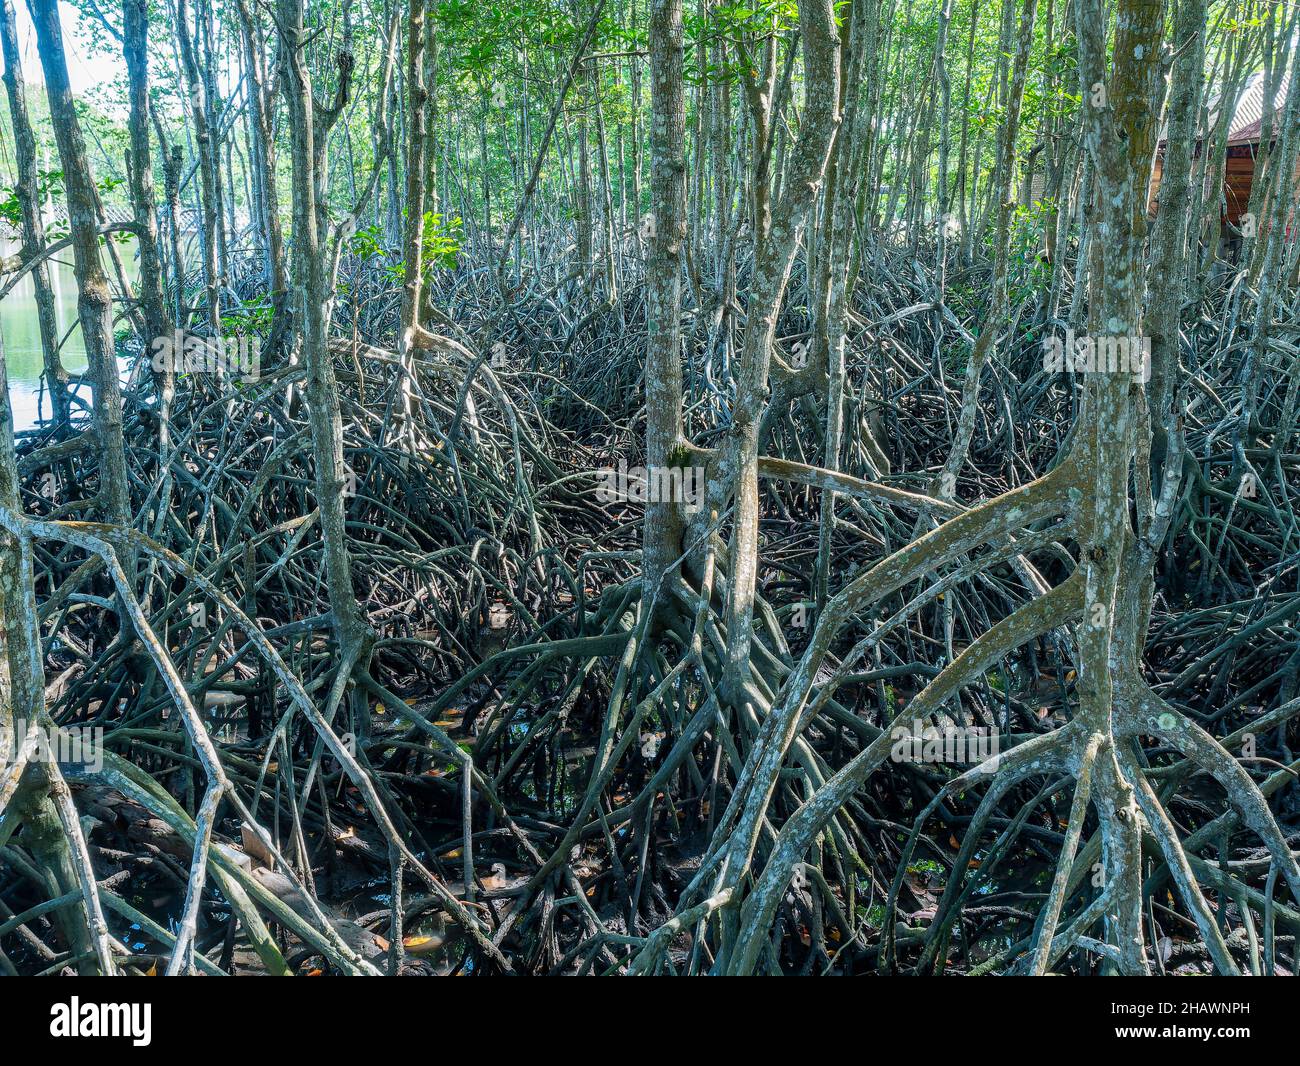 Mangrove forest in the Surat Thani province of Thailand. Stock Photo